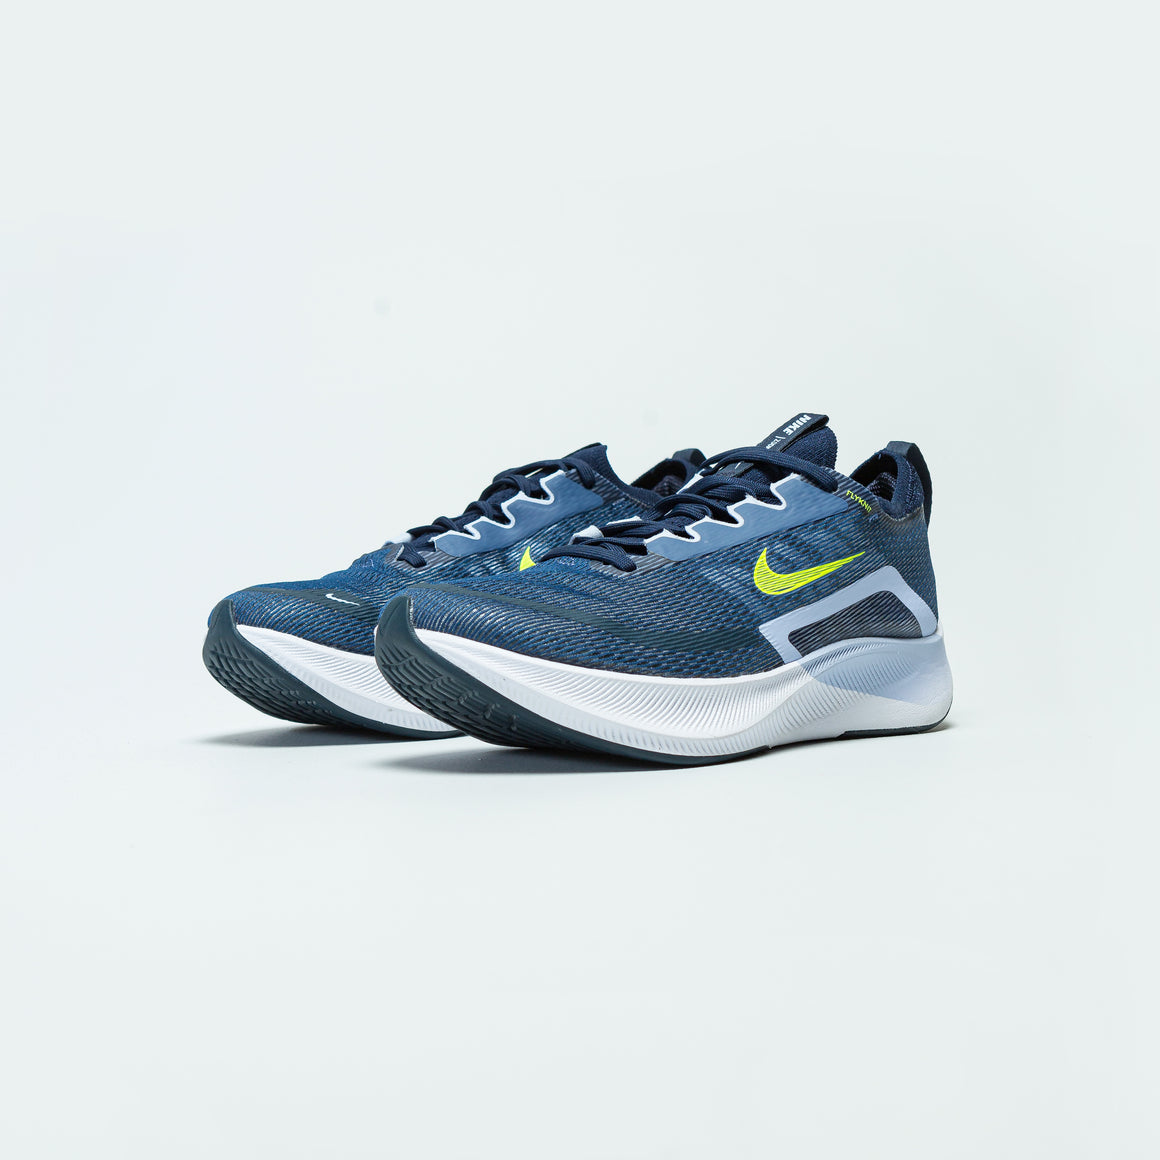 Nike - Womens Zoom Fly 4 - Mystic Navy/Volt-Armory Navy - Up There Athletics